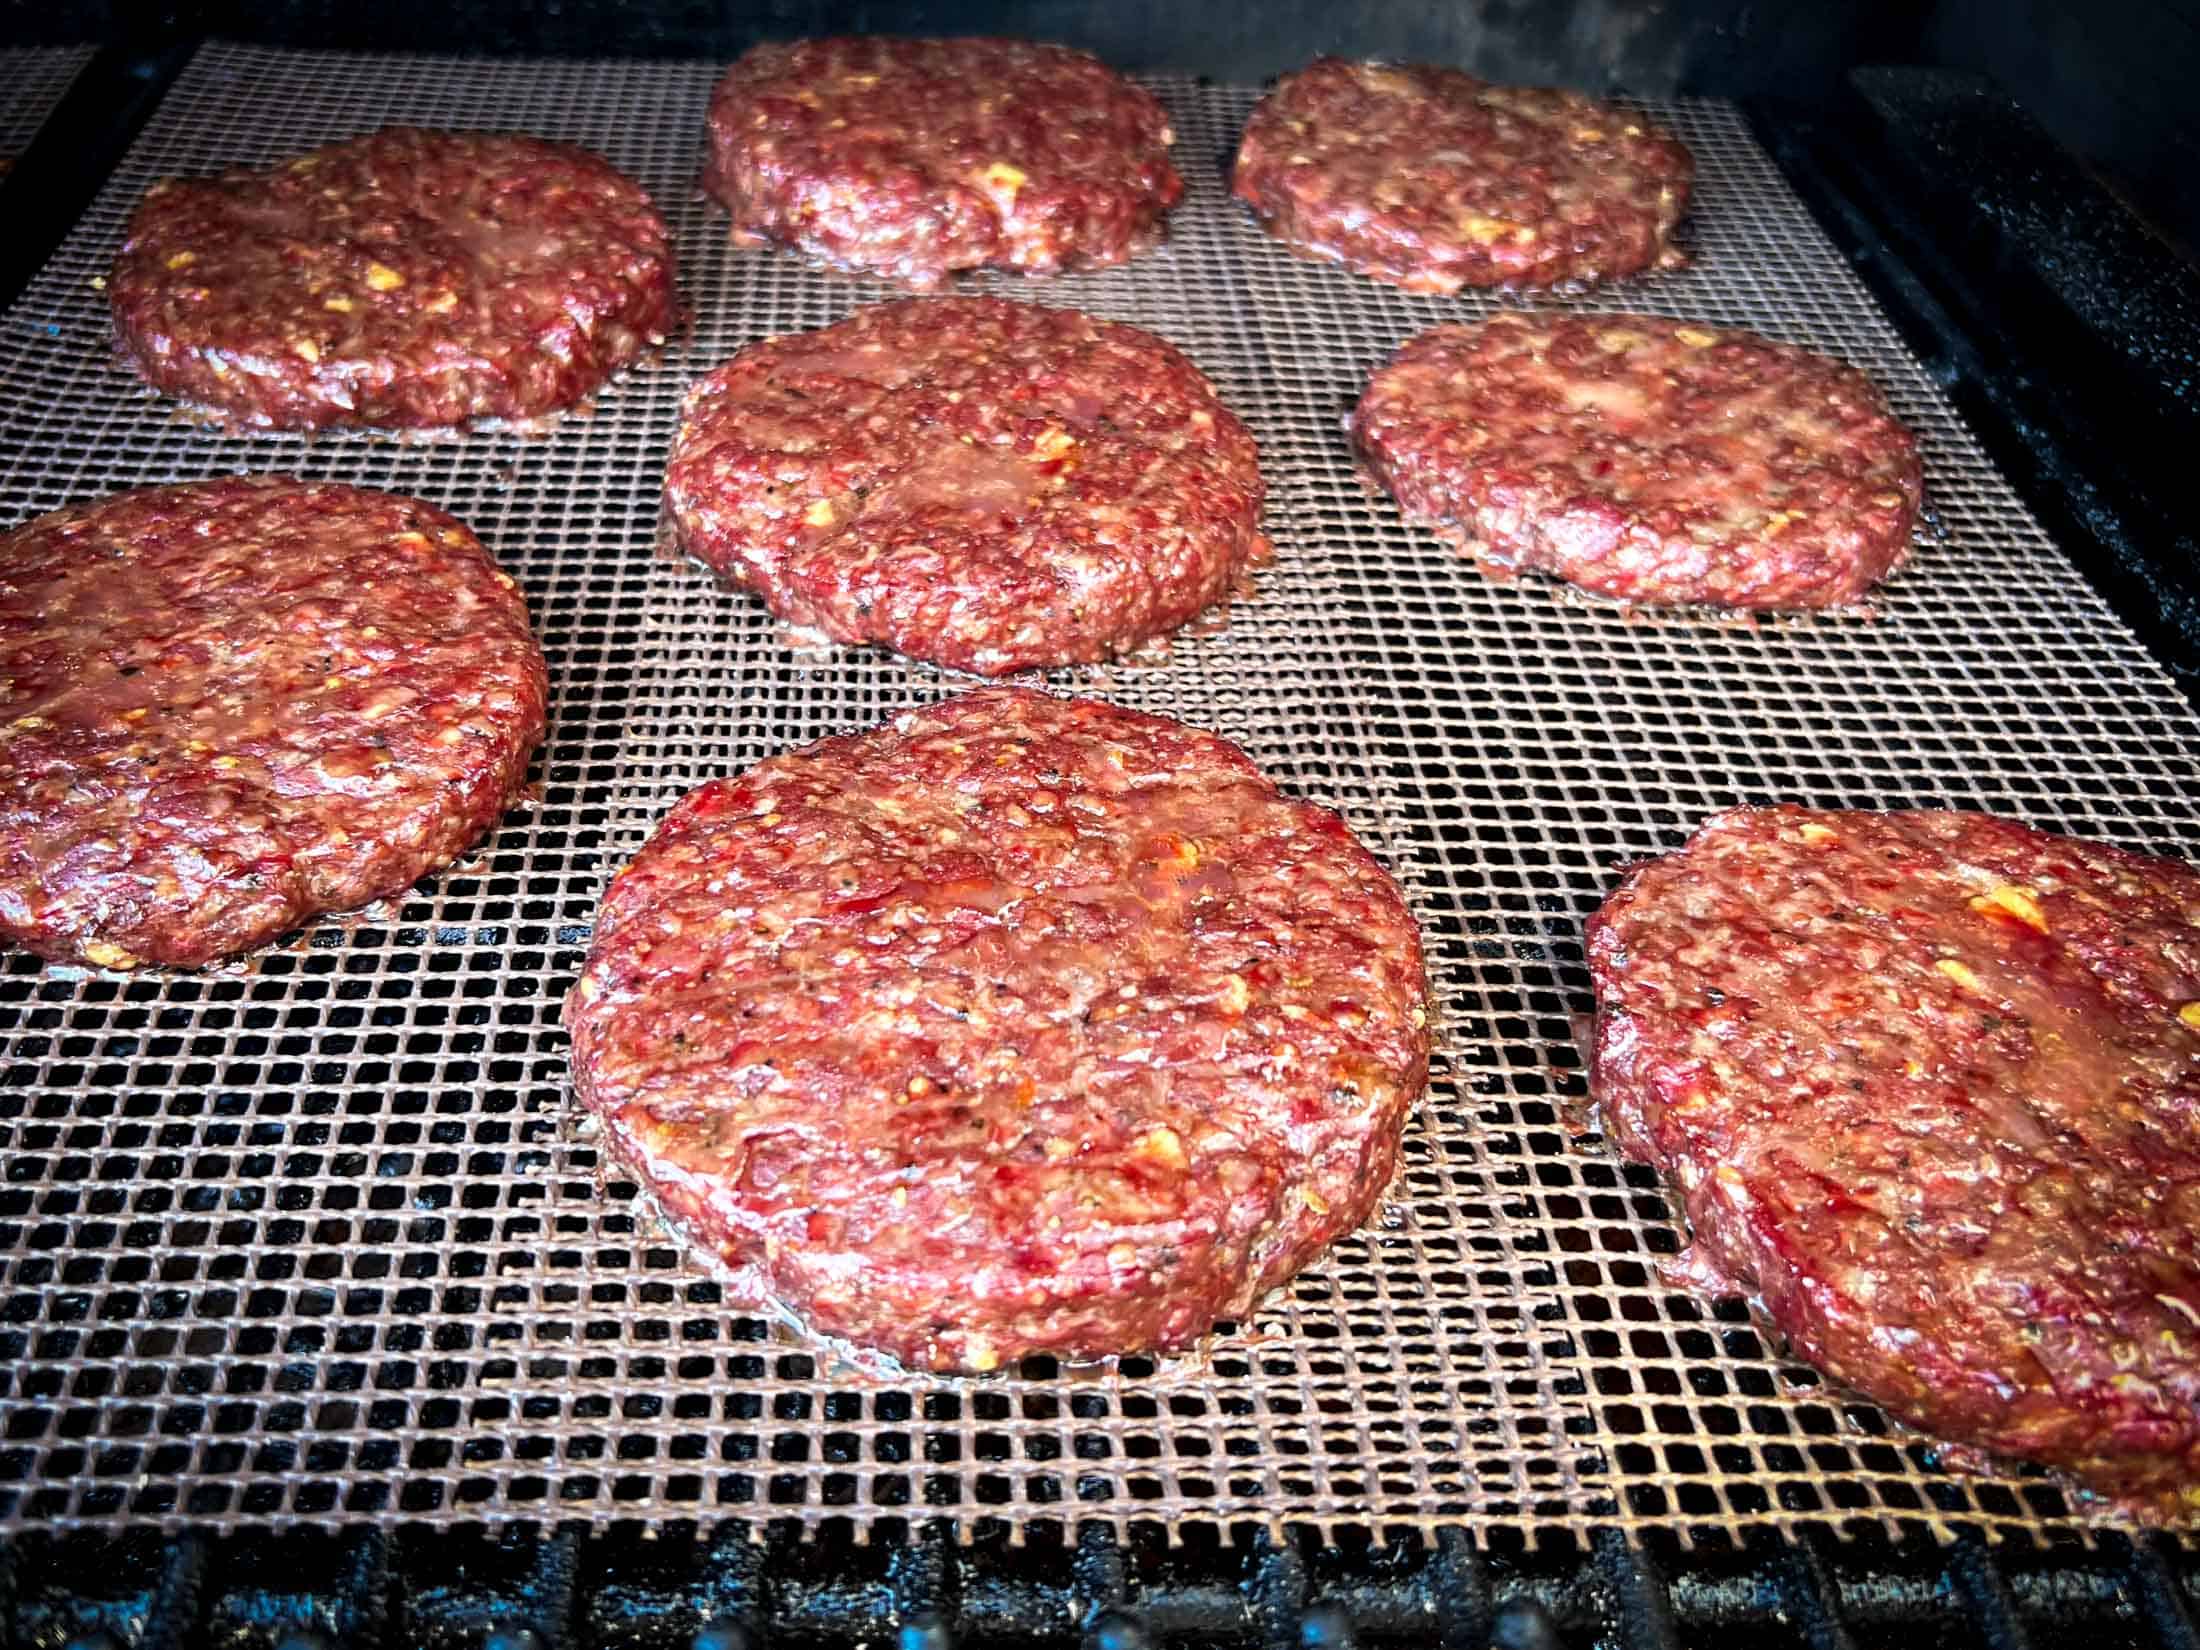 Fully cooked venison burgers on a grill.